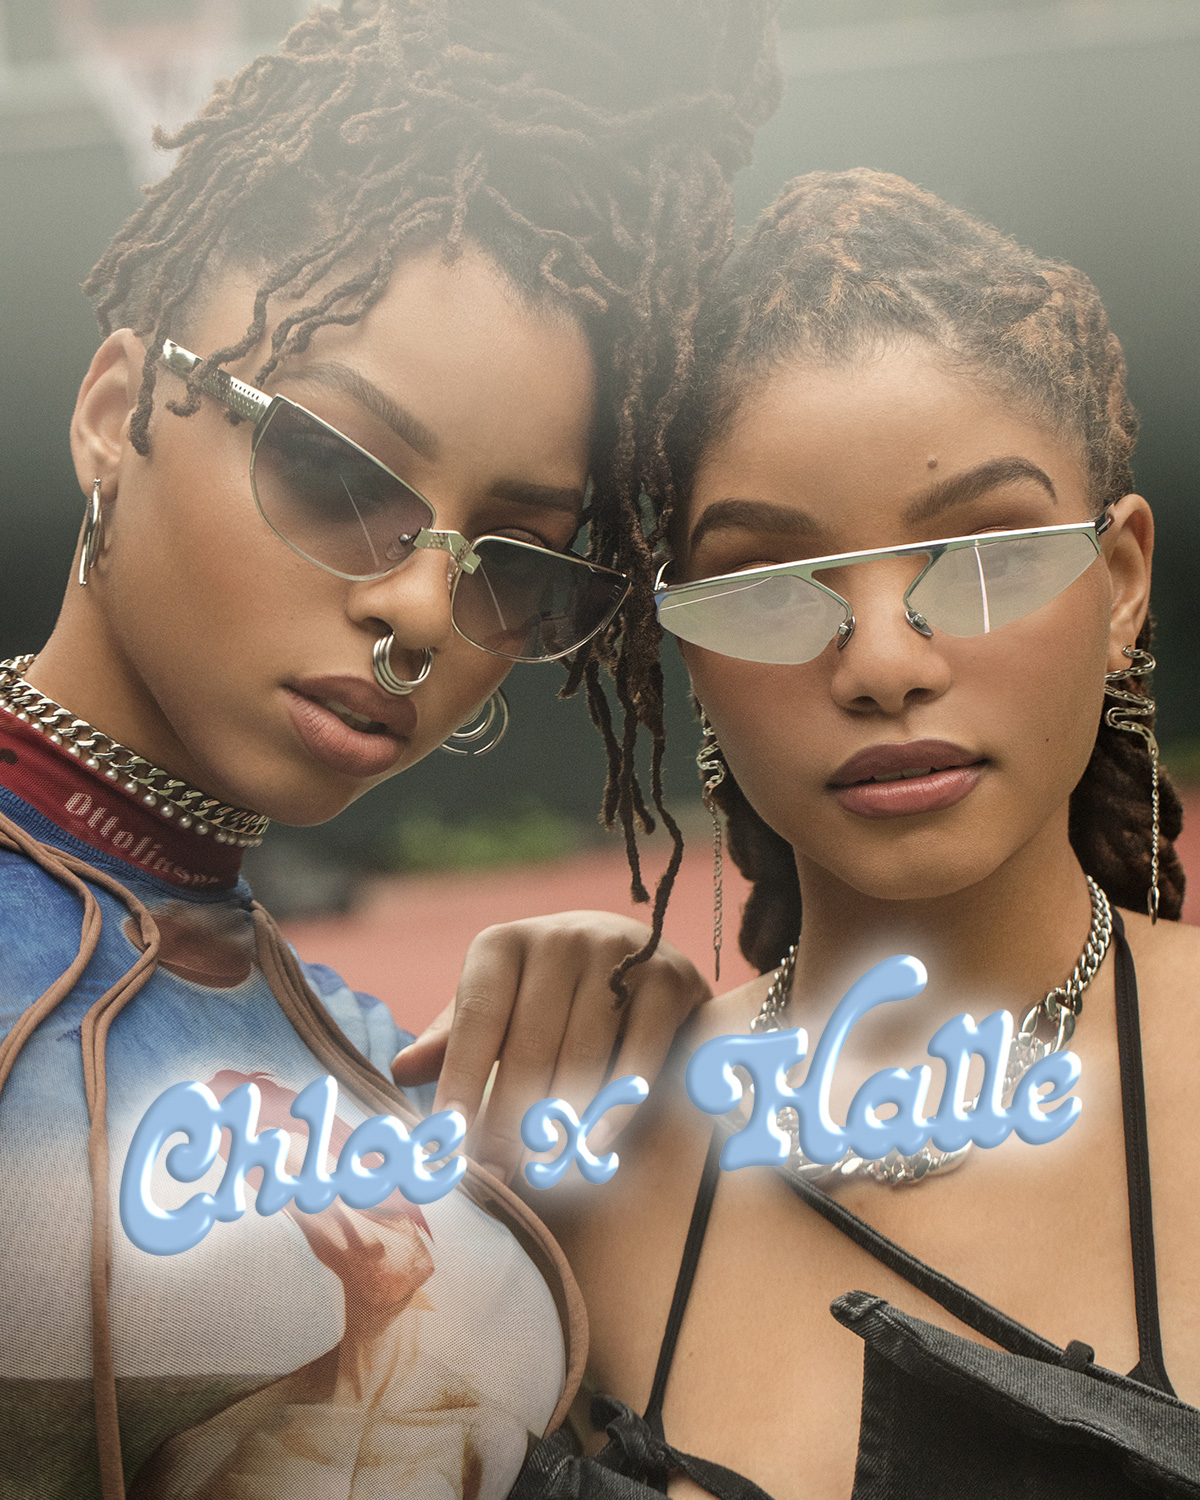 chloe-and-halle-interview-main